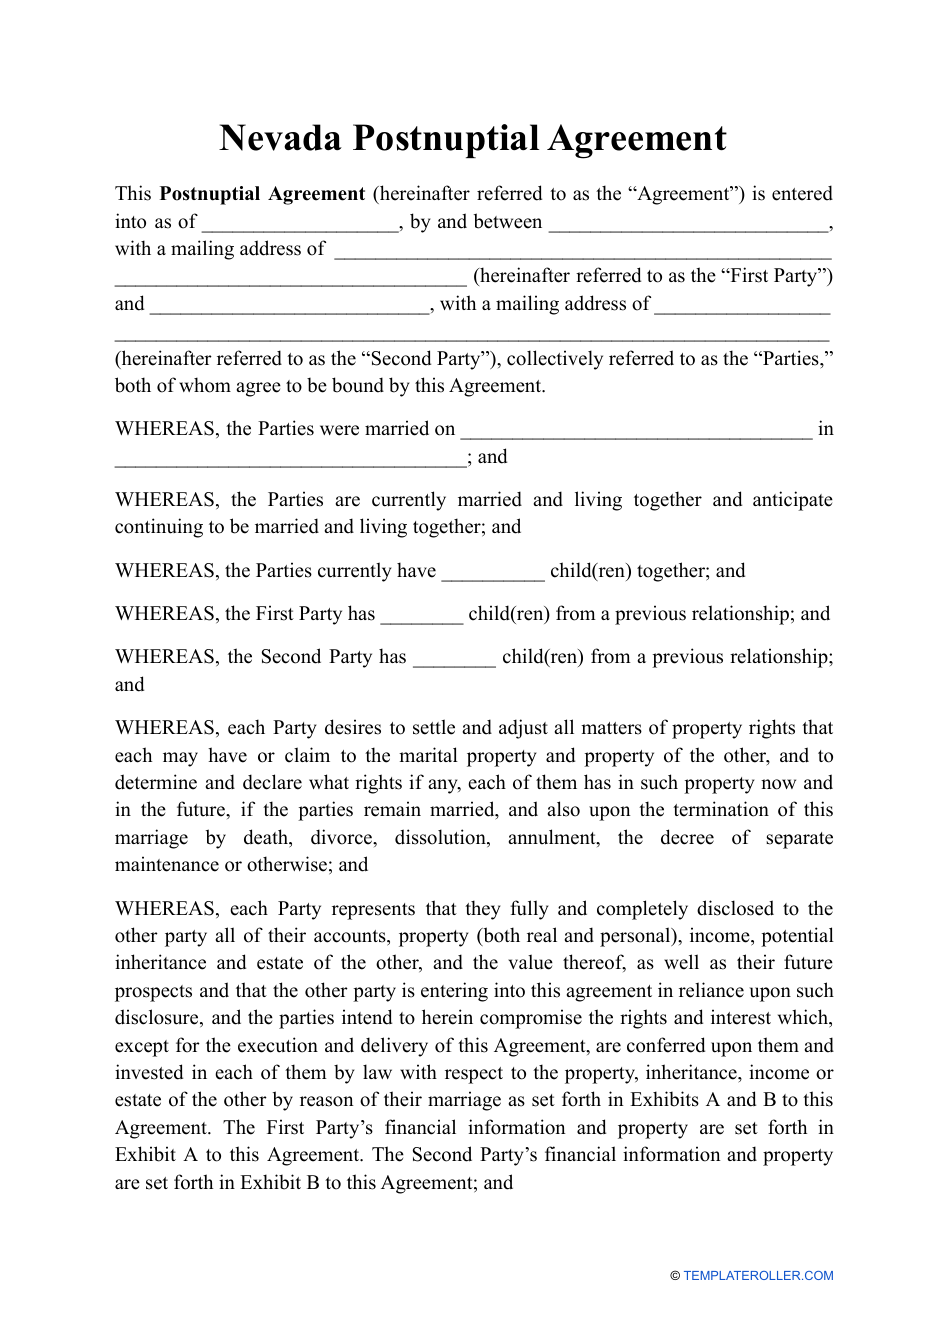 Postnuptial Agreement Template - Nevada, Page 1